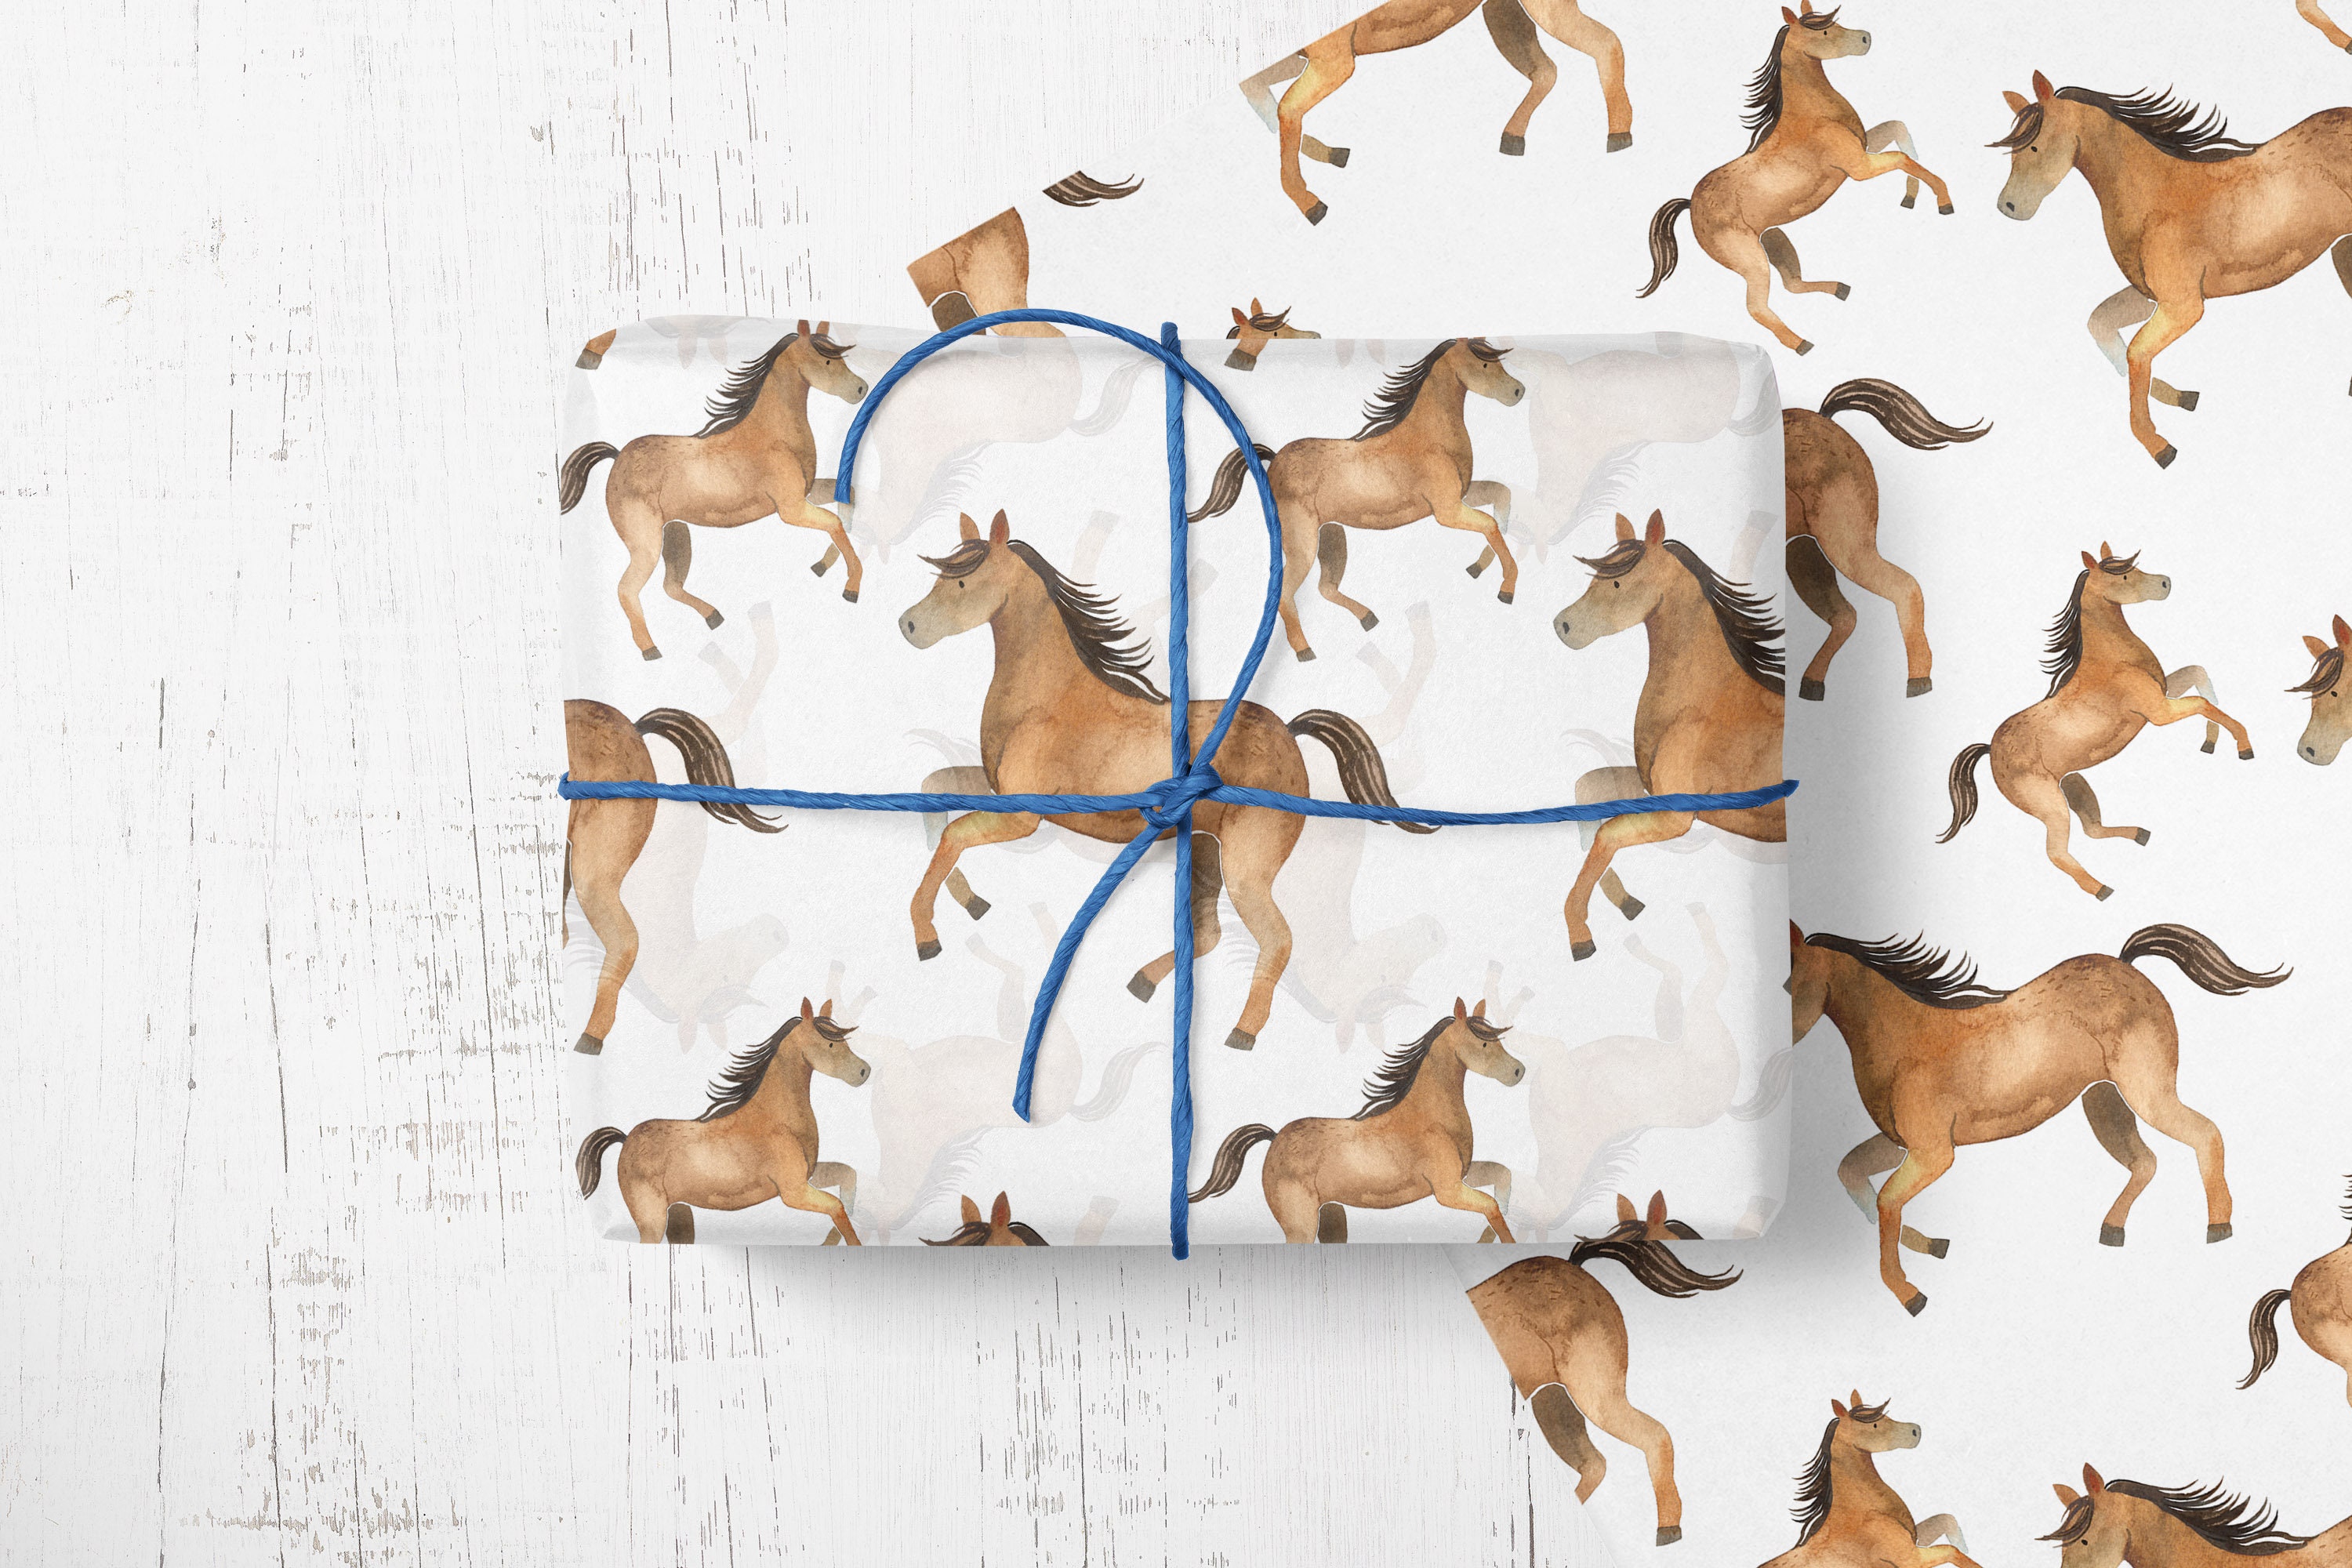 Horse Christmas Wrapping Paper Roll, Pony Christmas Wrapping Paper, Kids  Pony Christmas Wrapping Paper, Fun Christmas Gift Wrap, Horsey Xmas 